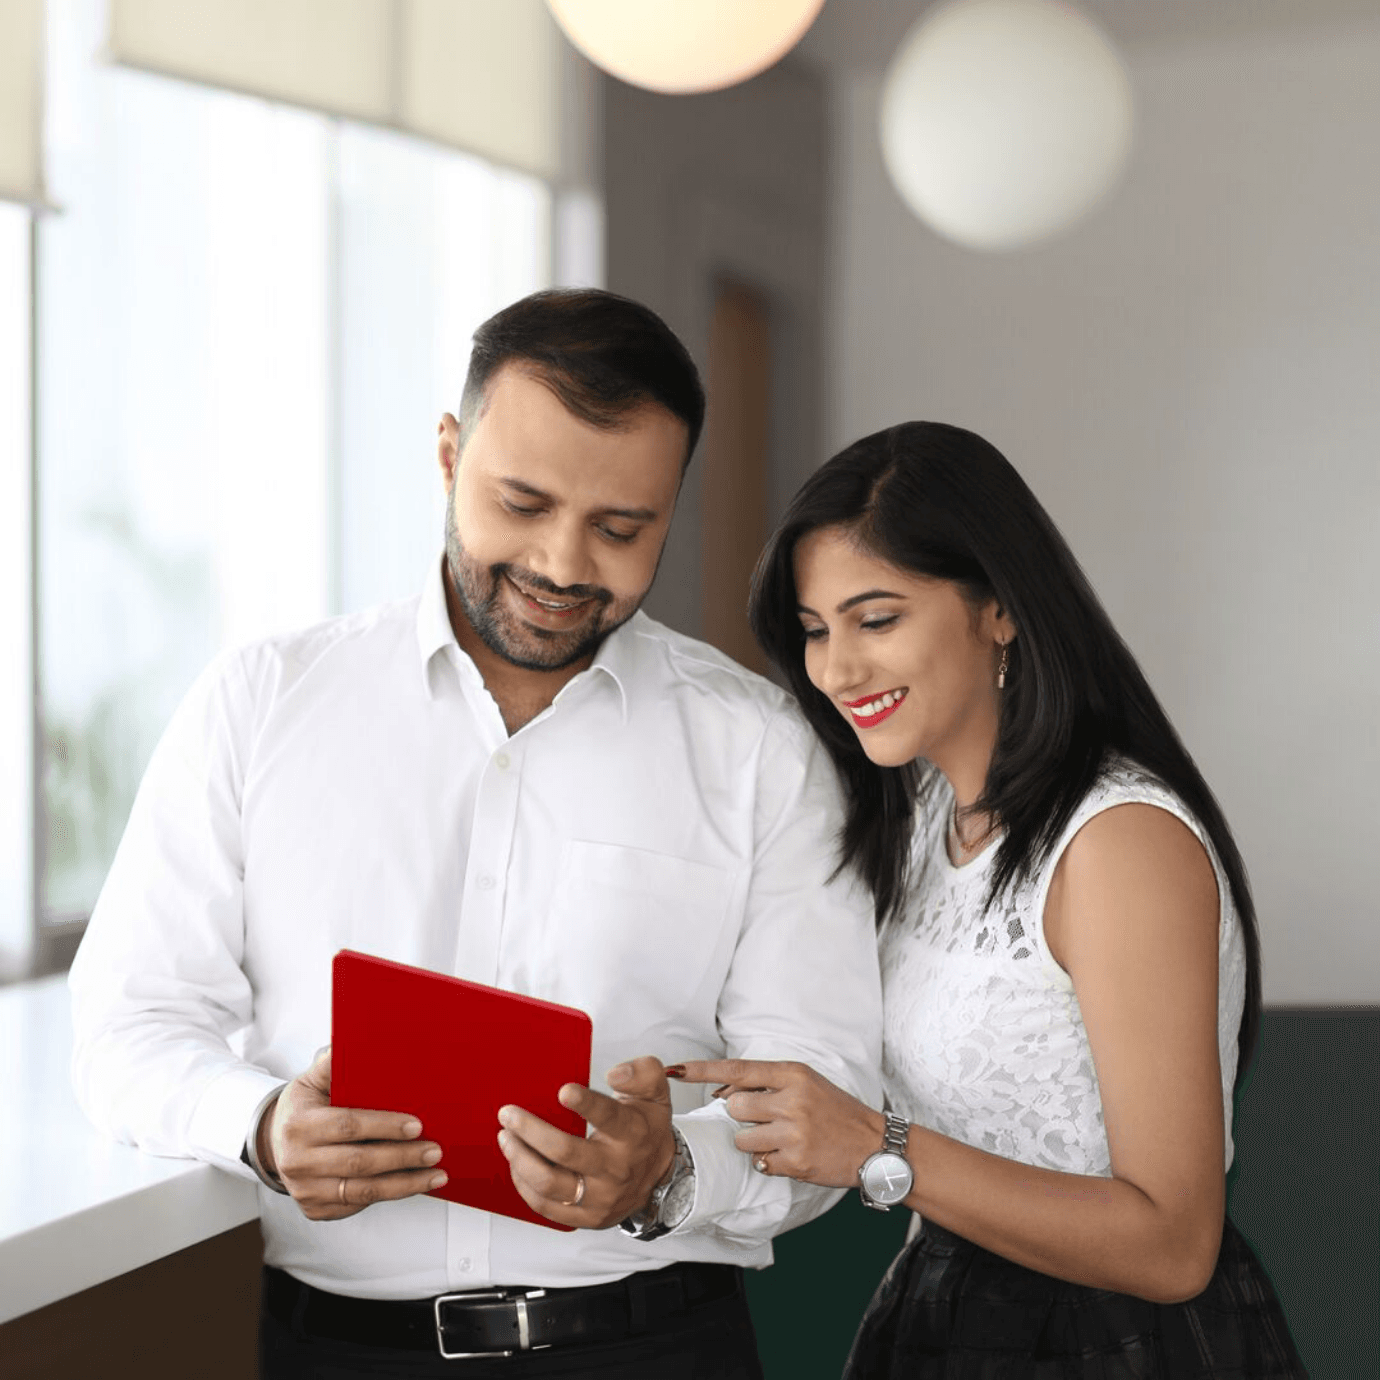 ratio-1-1-young-indian-couple-looking-at-a-tablet@3x